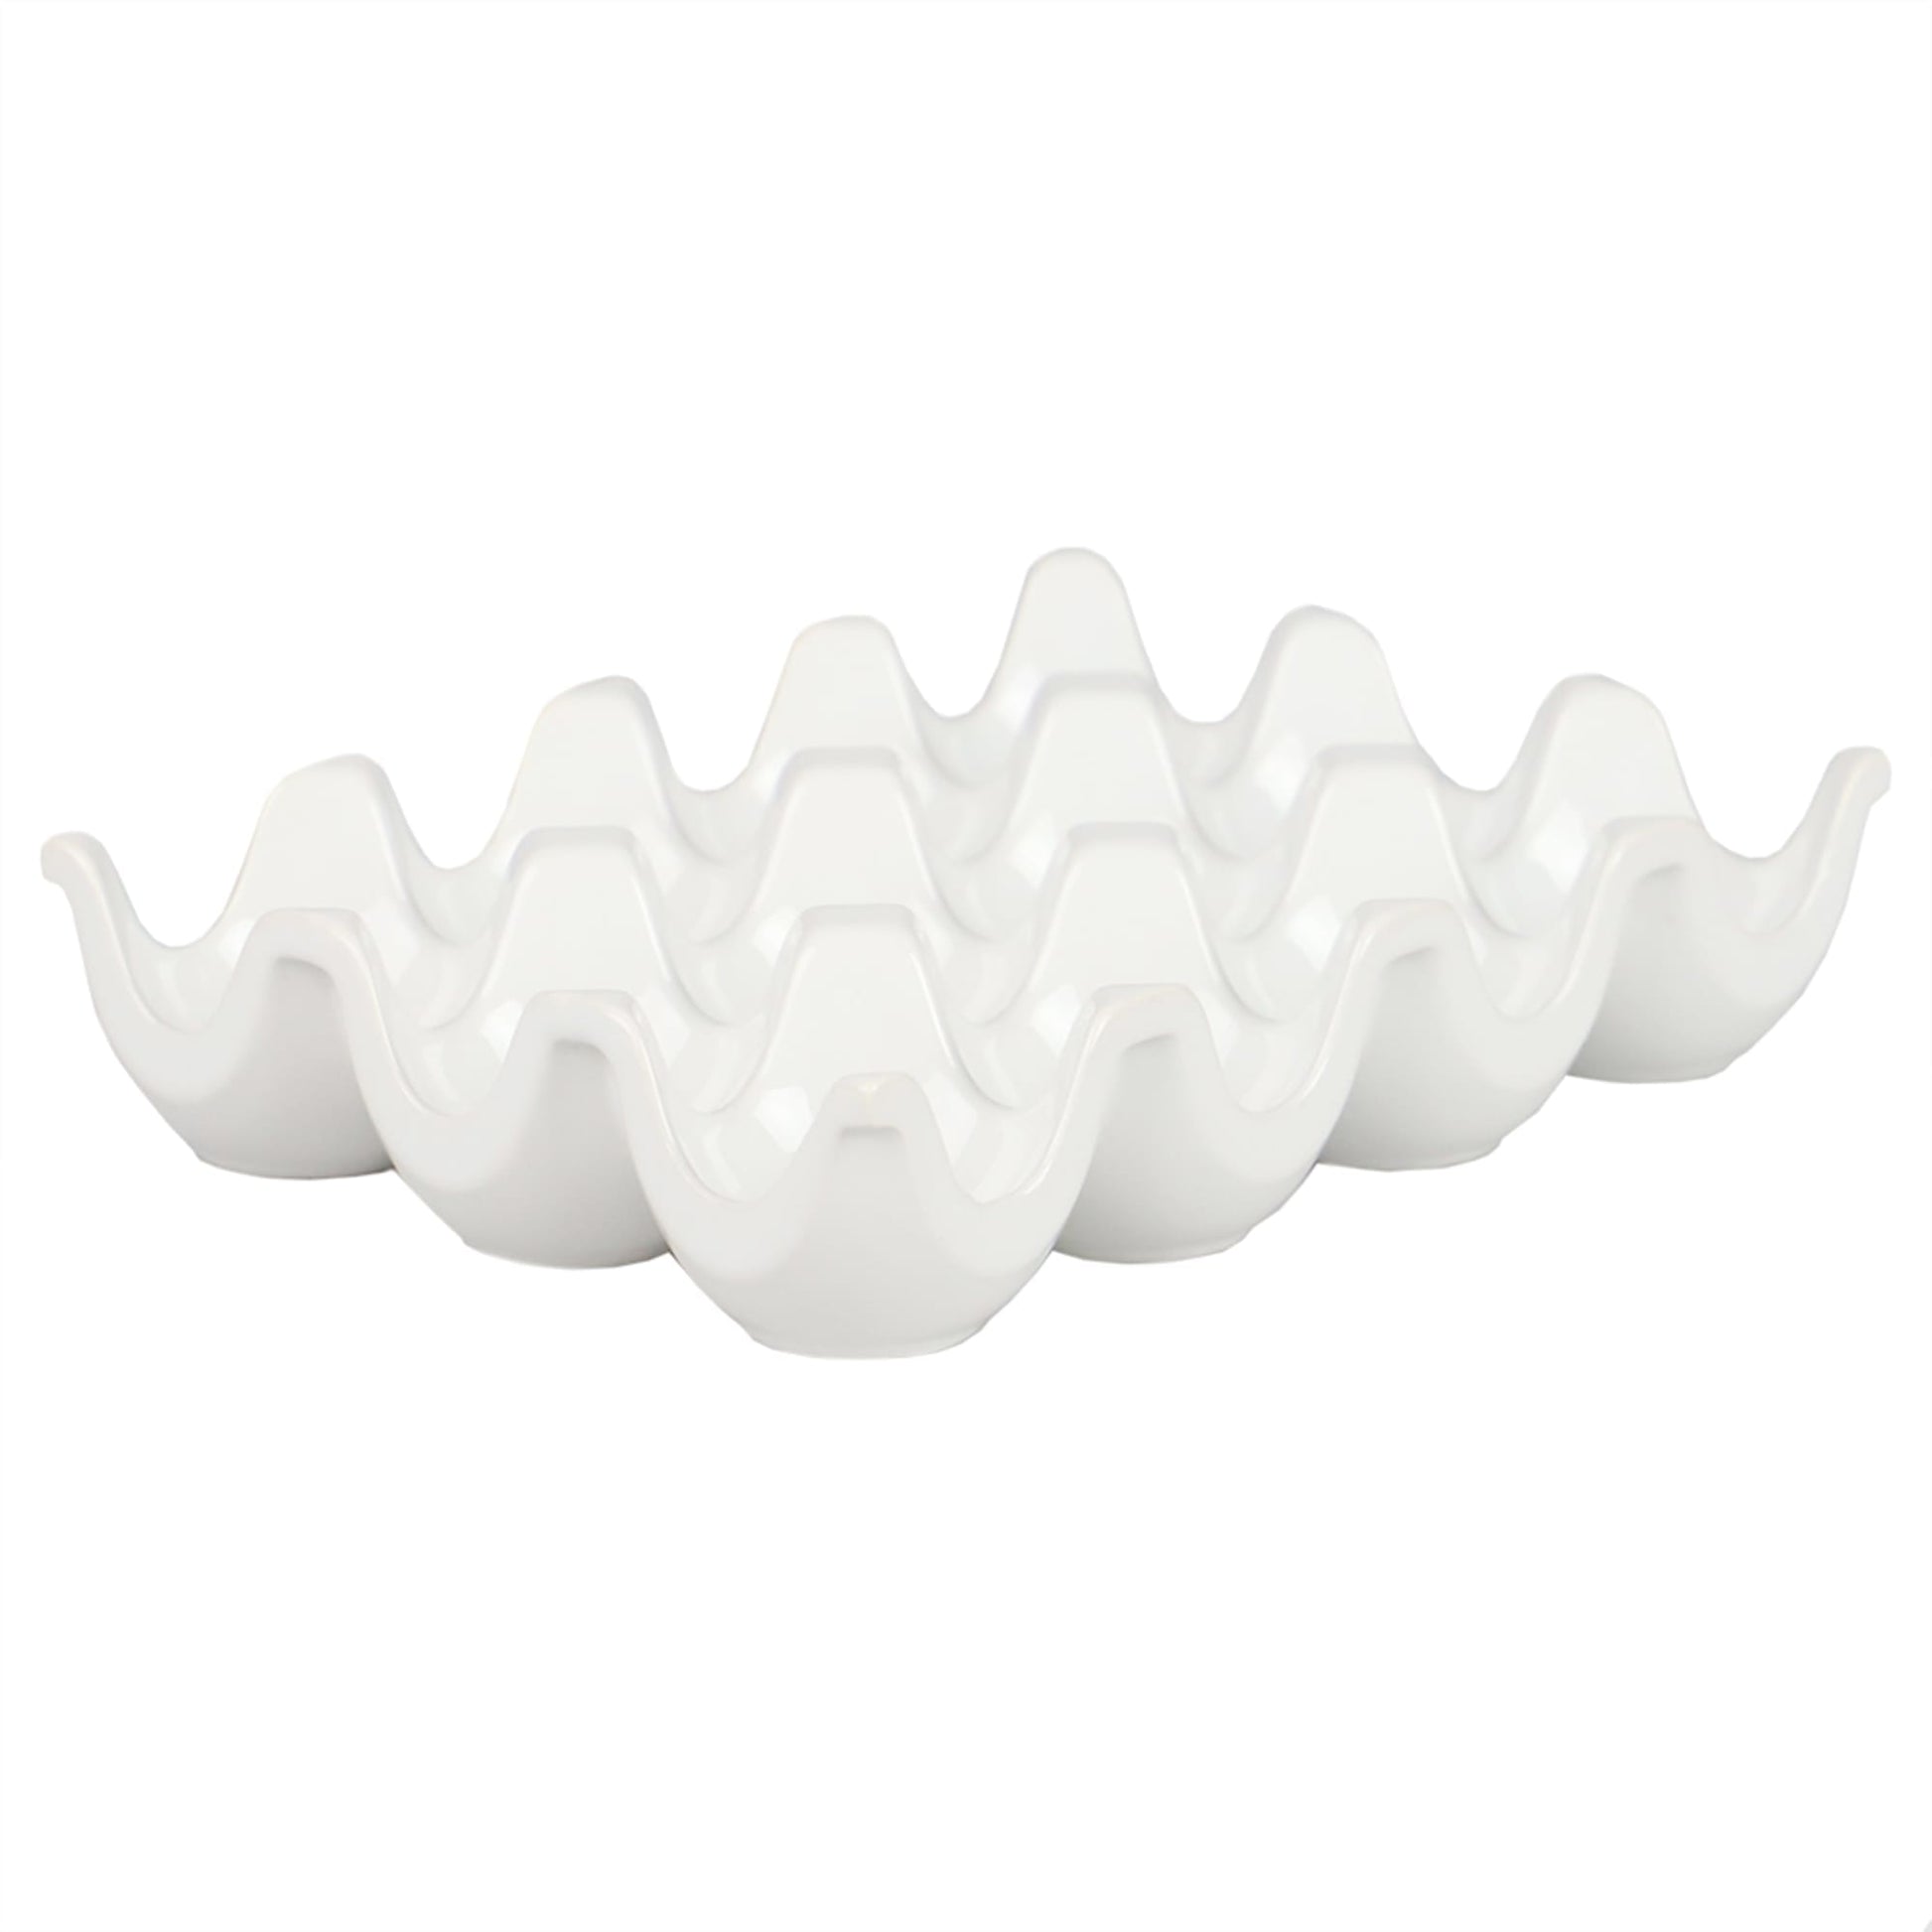 COMFECTO Egg Tray Holder, 12 Cup Large Egg Holder Kitchen Storage Fridge  Organizer Decorative Crate for Jewelry Charm Beads, White Ceramic Heat